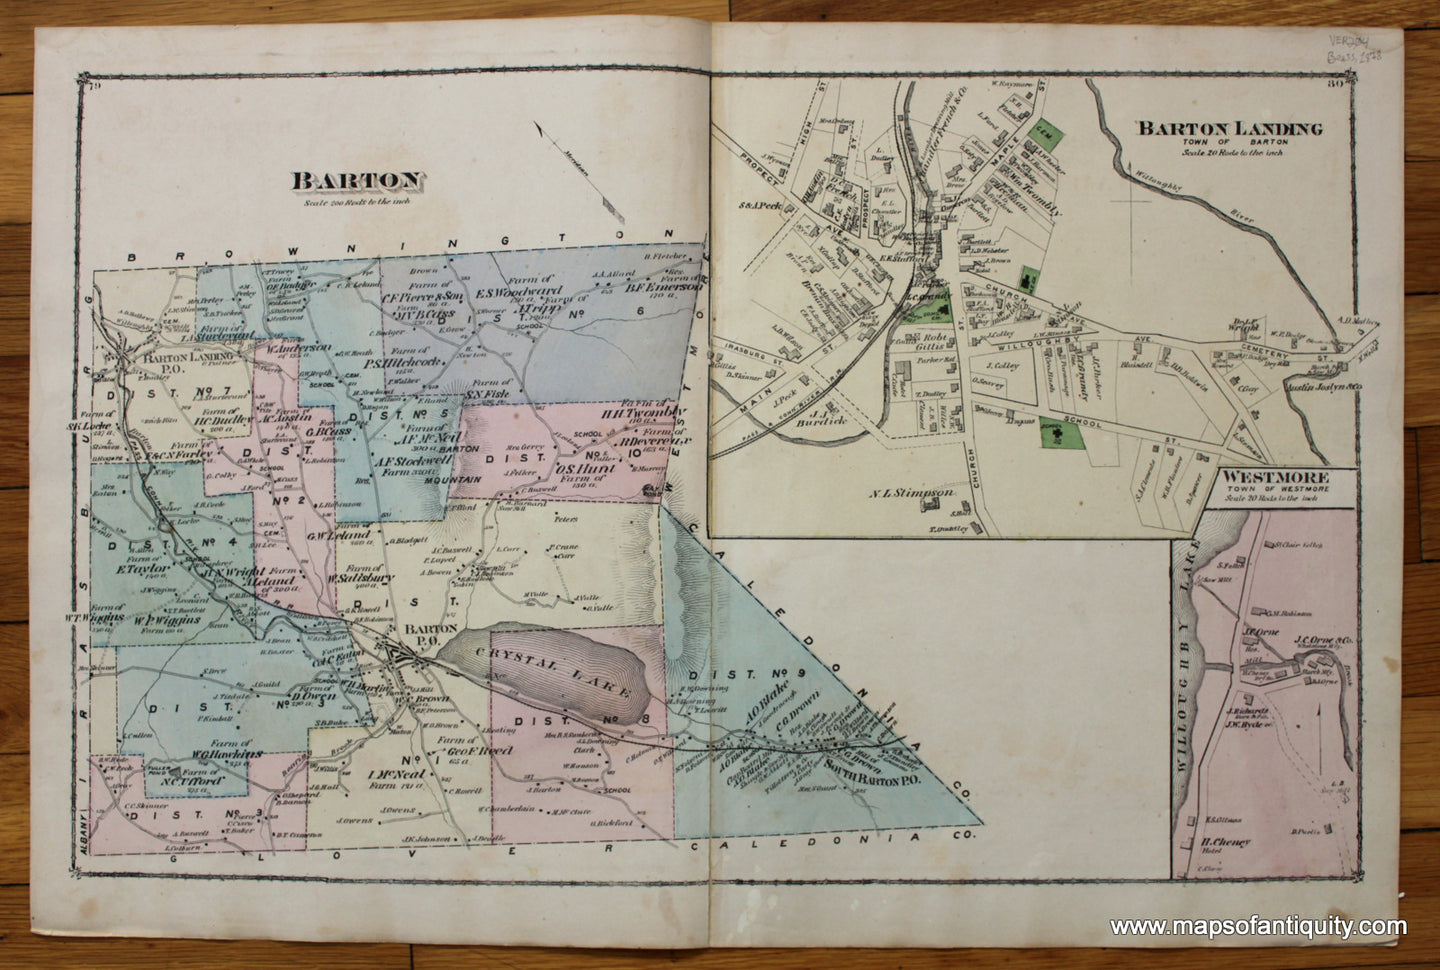 Antique-Hand-Colored-Map-Barton-Barton-Landing-and-Westmore-Verso:-Barton-&-Westmore-(VT)-**********-United-States-Northeast-1878-Beers-Maps-Of-Antiquity